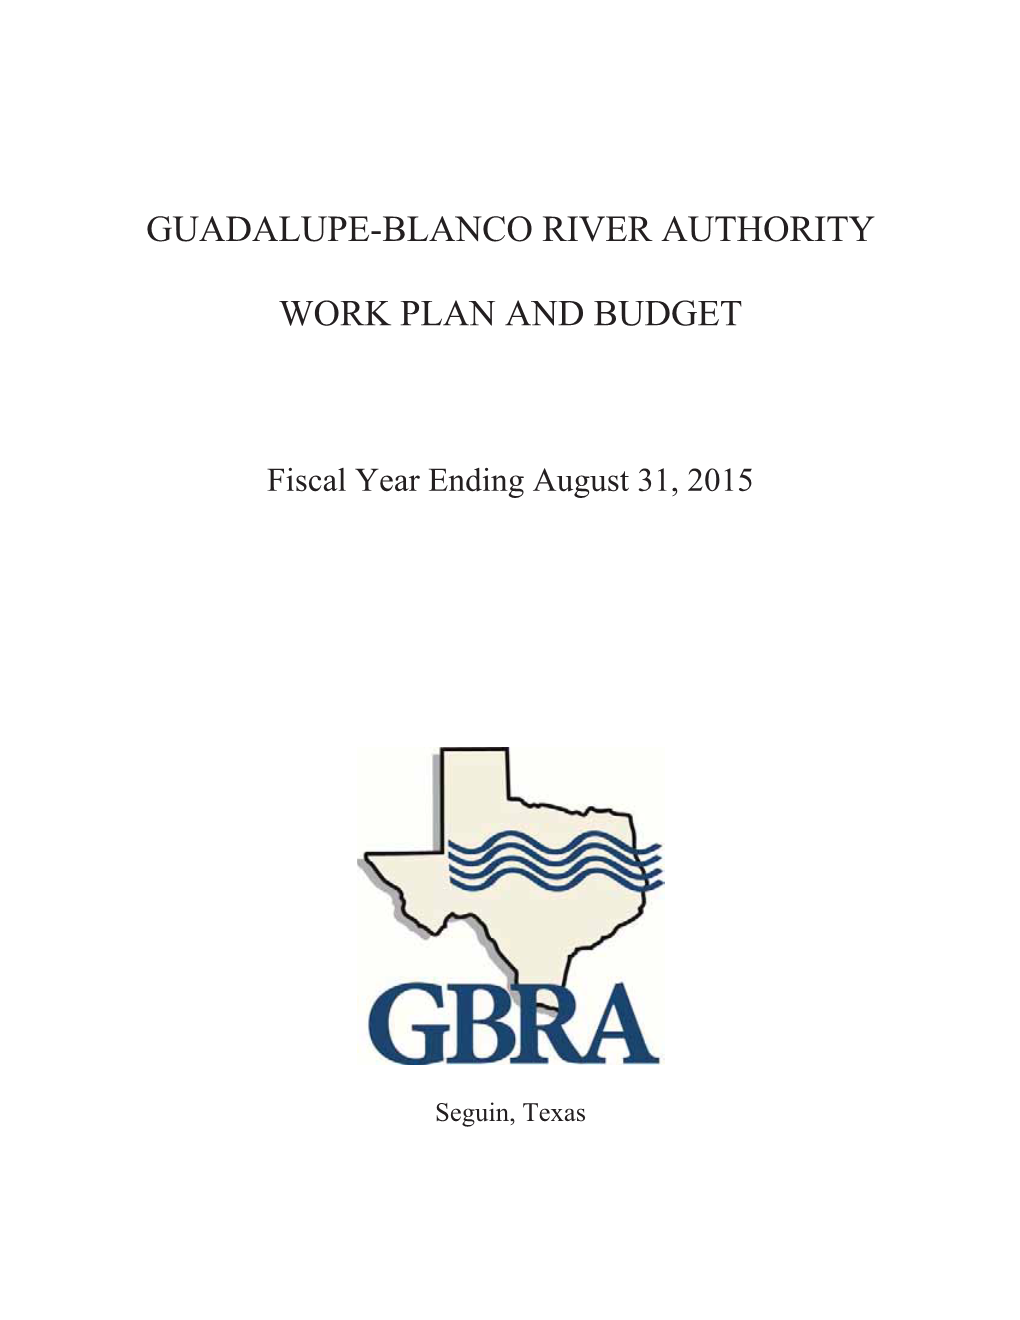 Guadalupe-Blanco River Authority WORK PLAN and BUDGET PROGRAM NARRATIVE